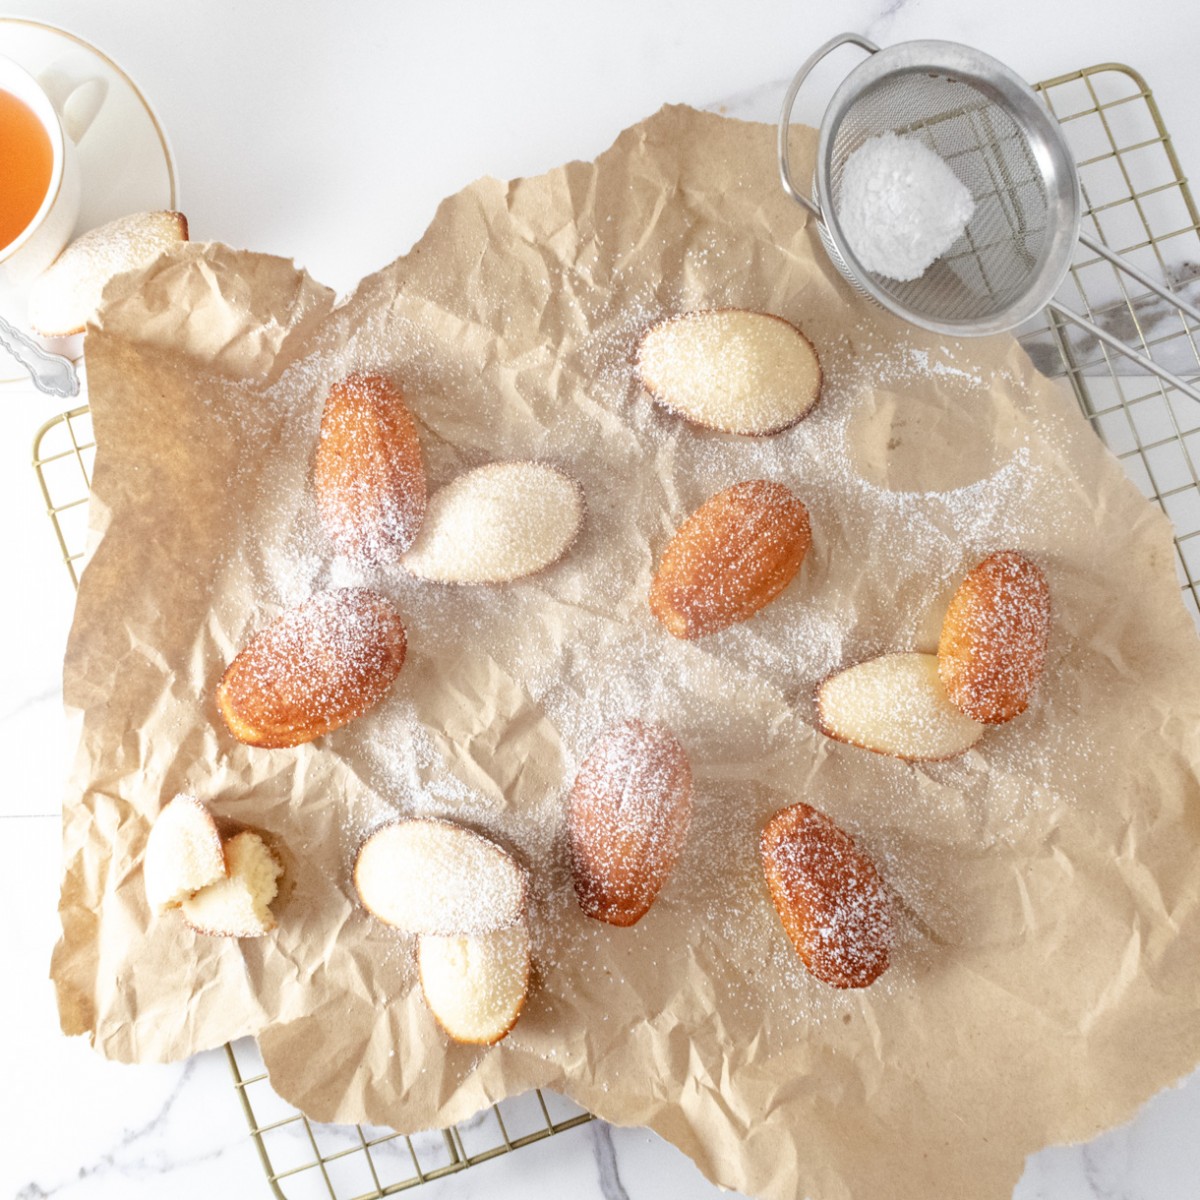 Madeleines lightly dusted with powdered sugar on a piece of kraft paper on a wire rack.